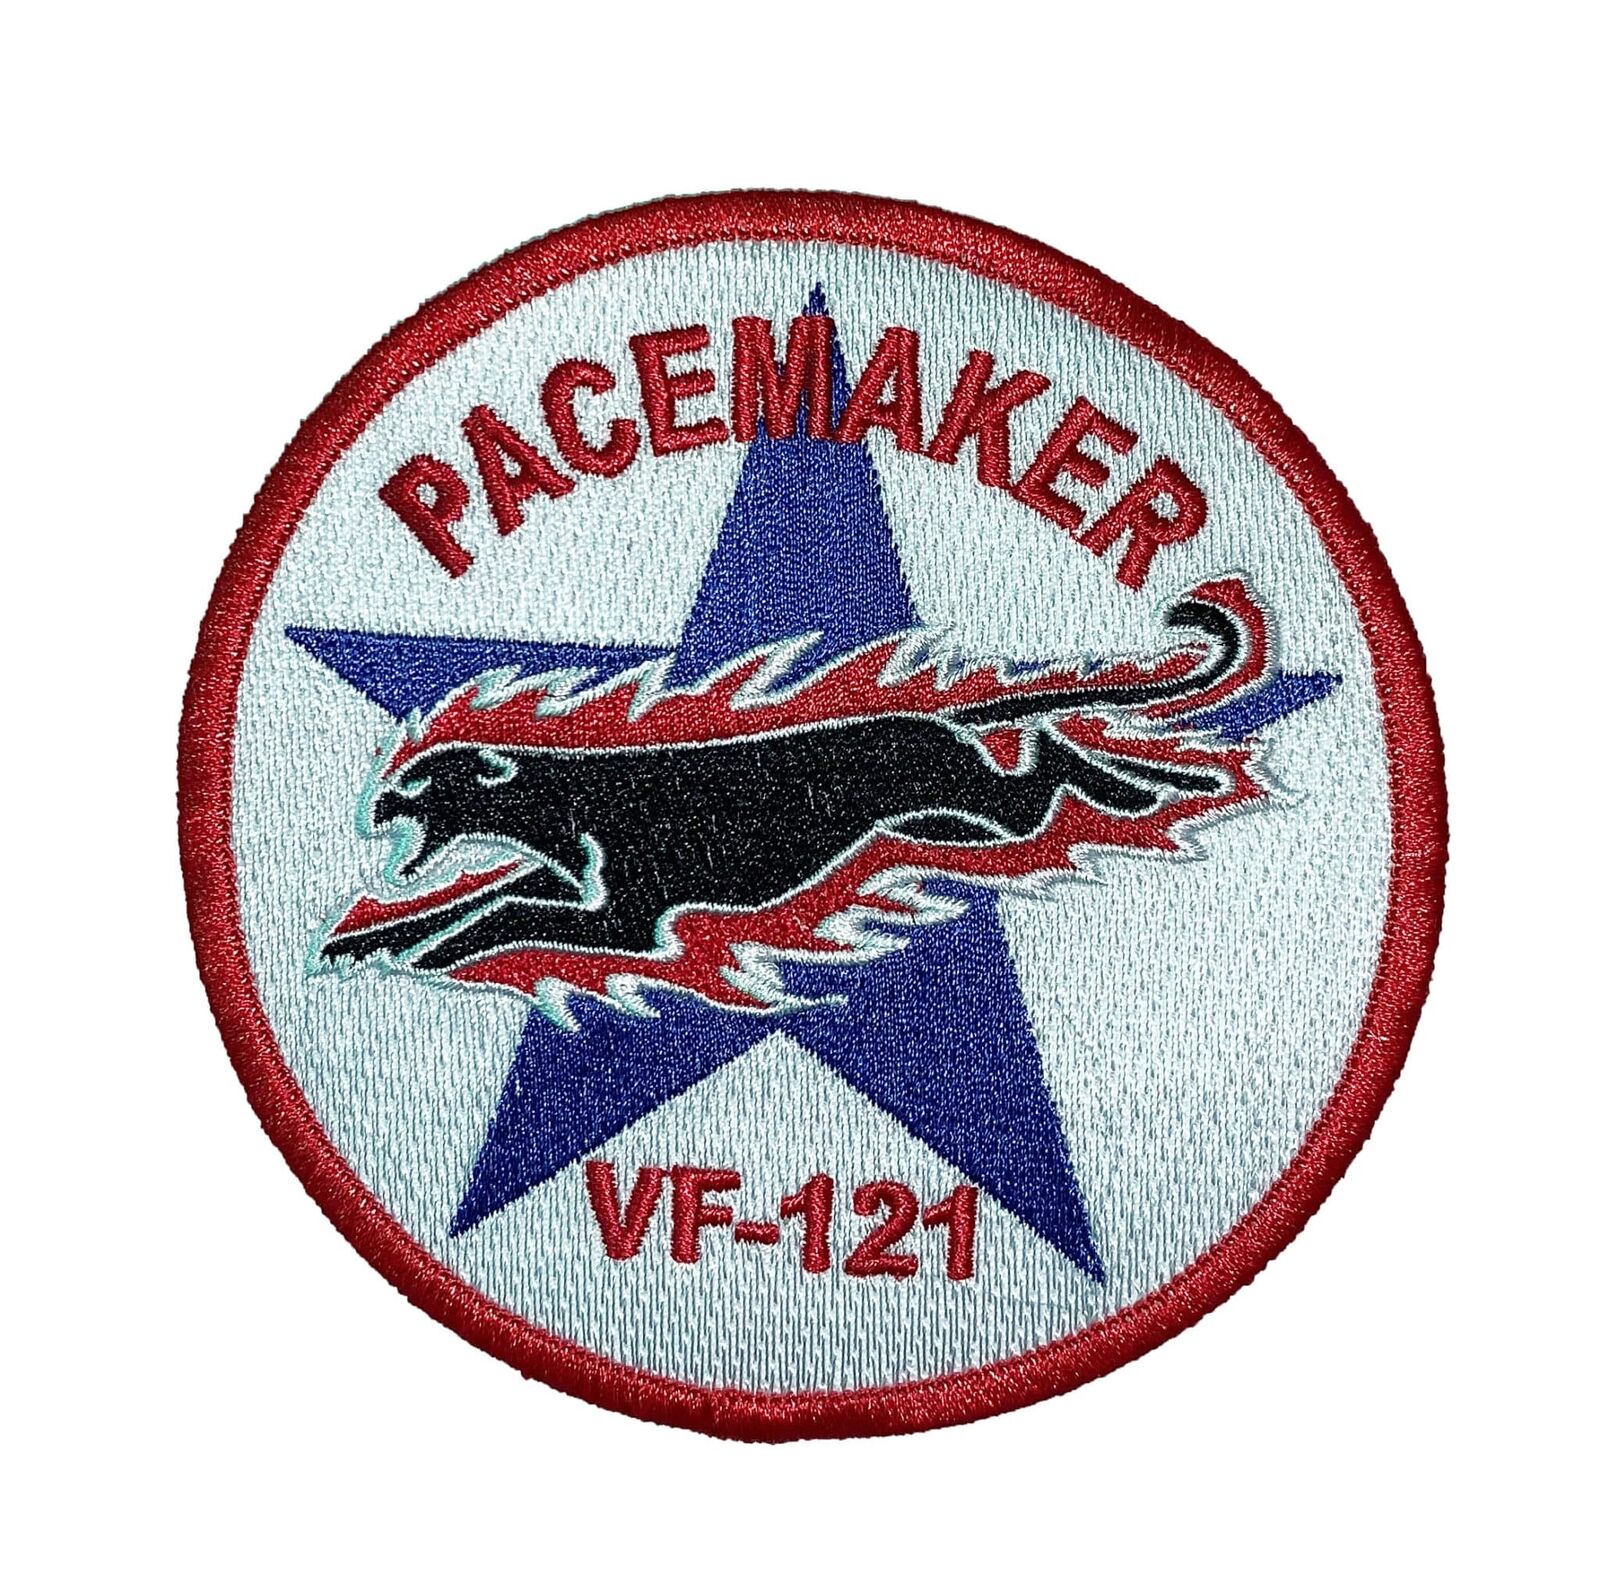 VF-121 Pacemakers Squadron Patch  – Sew on, 4